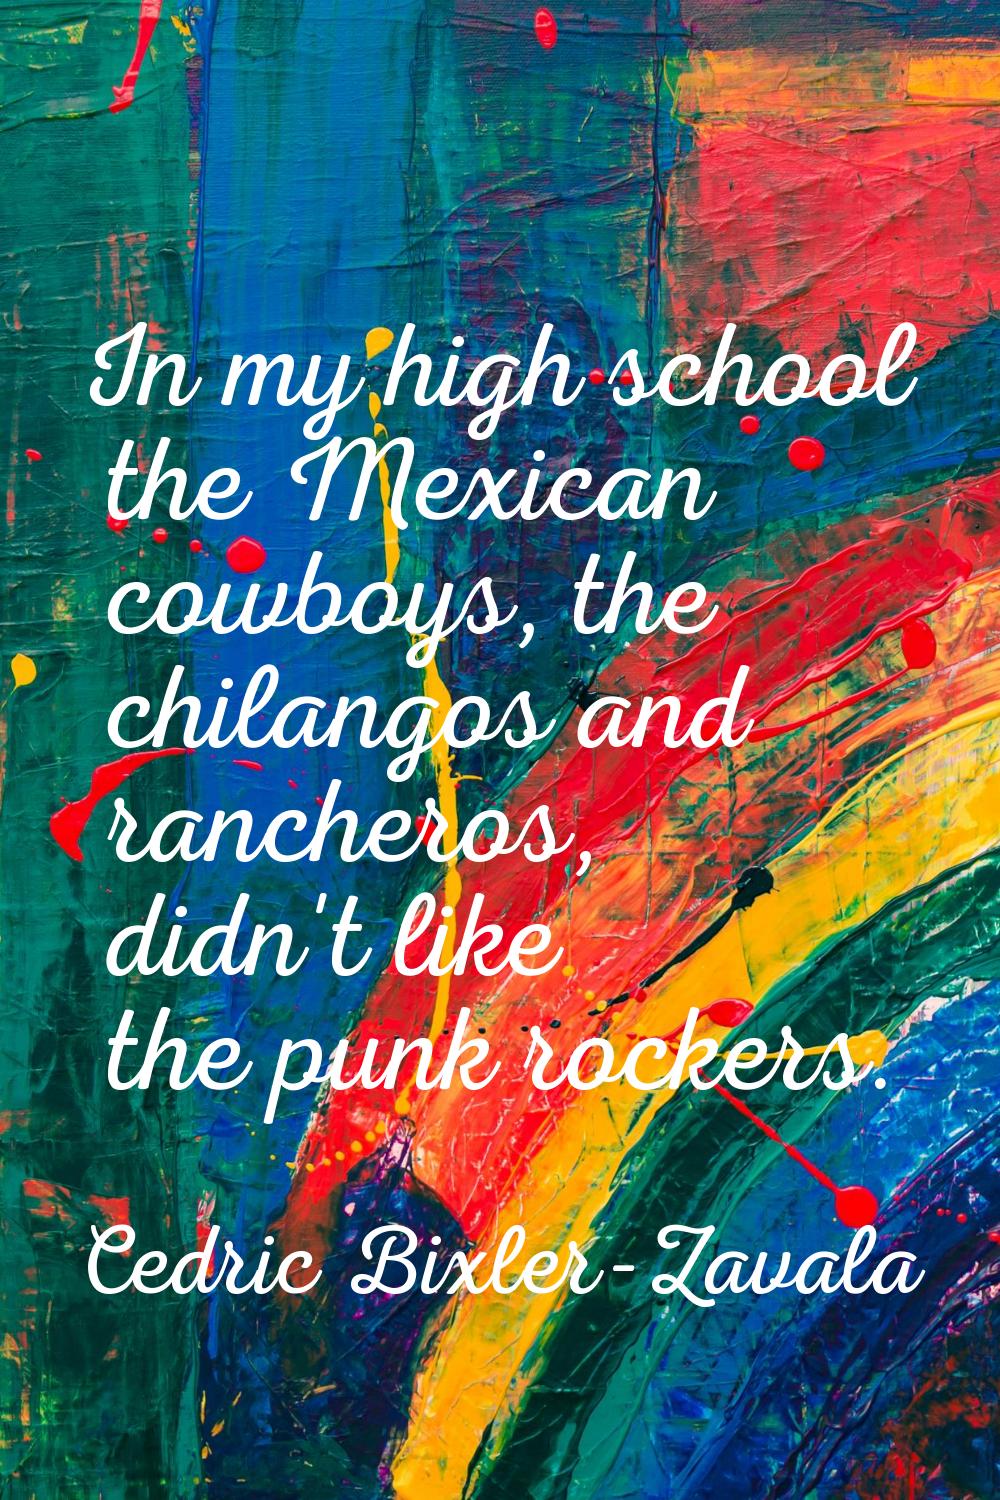 In my high school the Mexican cowboys, the chilangos and rancheros, didn't like the punk rockers.